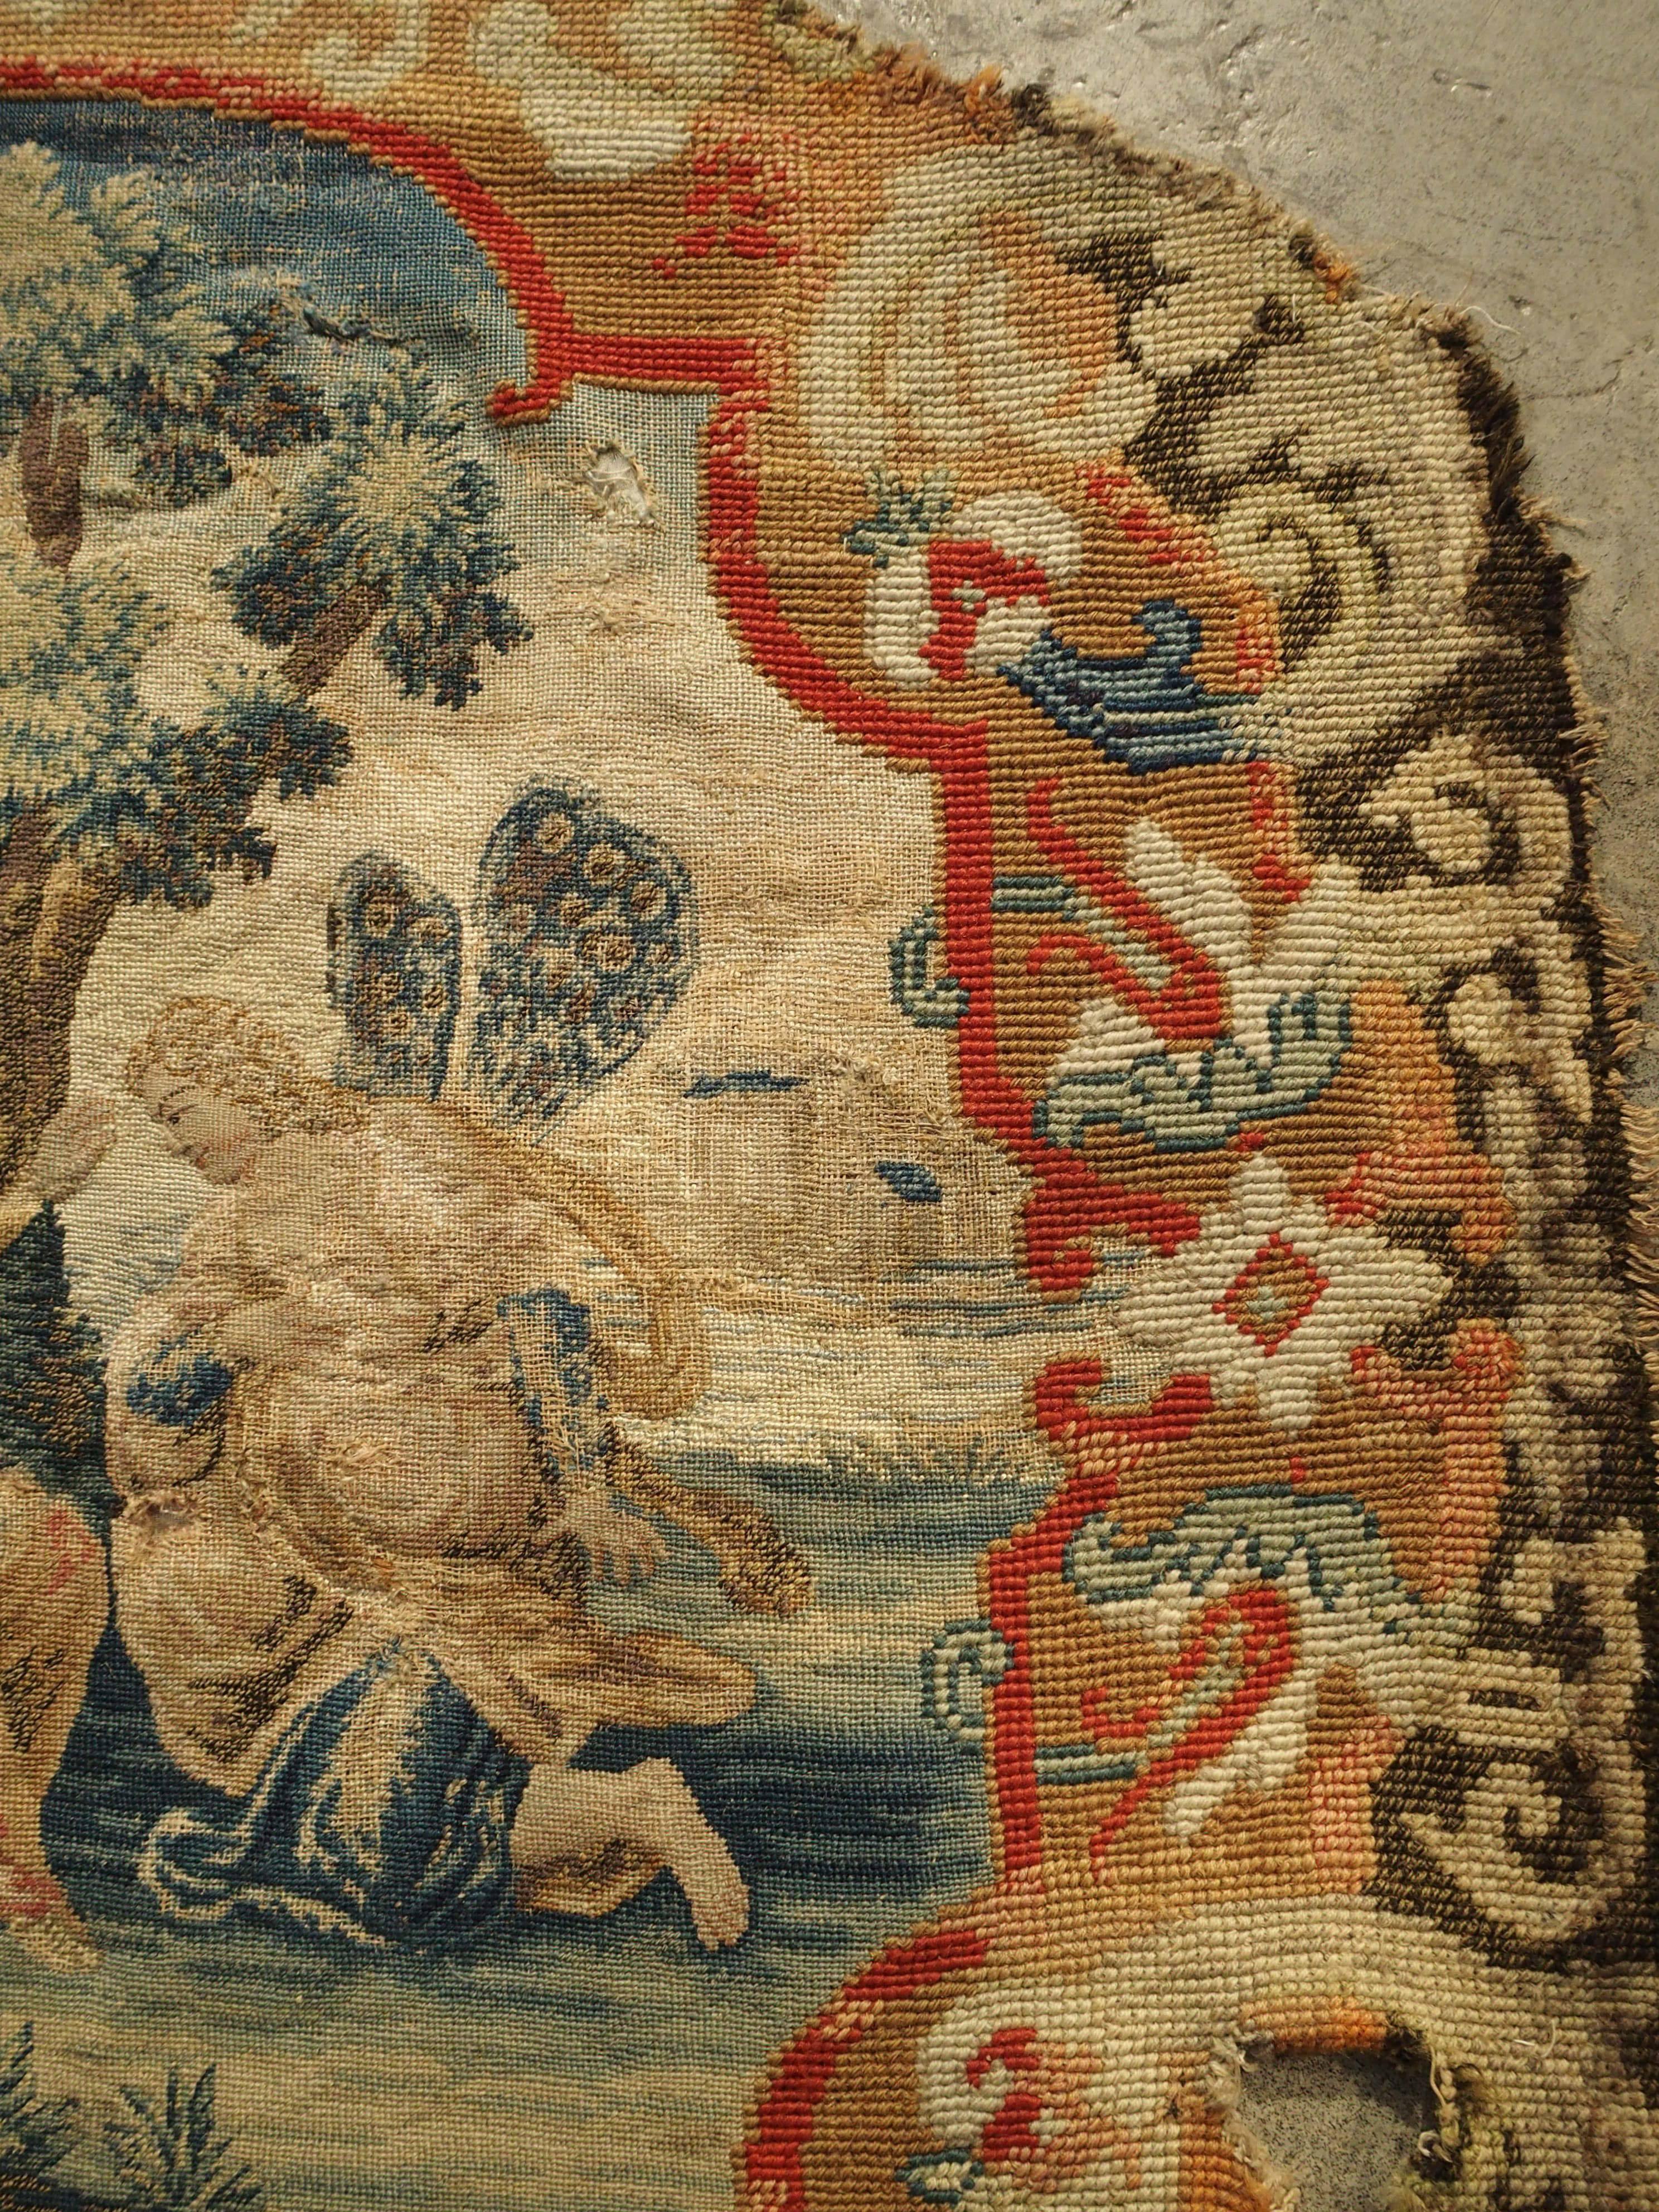 Hand-Woven Rare 17th Century French Scenic Silk Tapestry with Needlepoint Border Chair Back